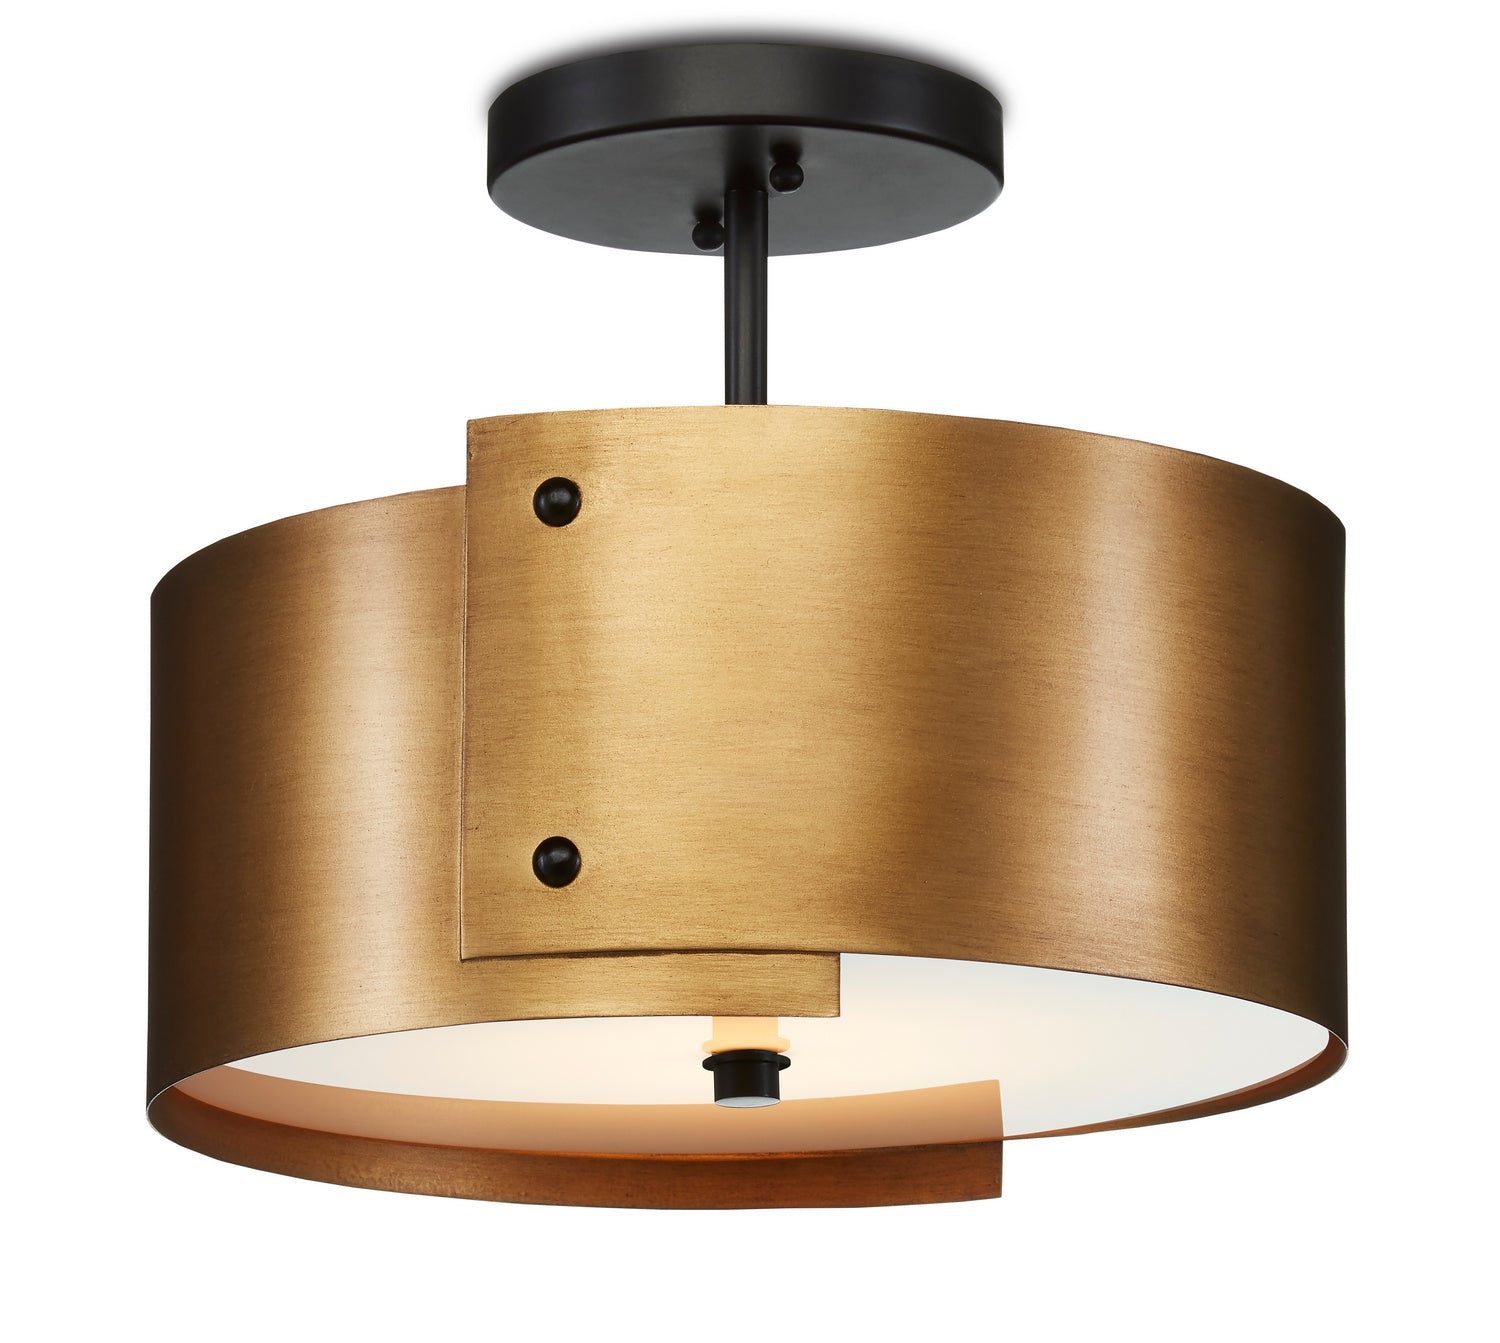 One Light Semi-Flush Mount from the Ritsu collection in Antique Brass/Black finish